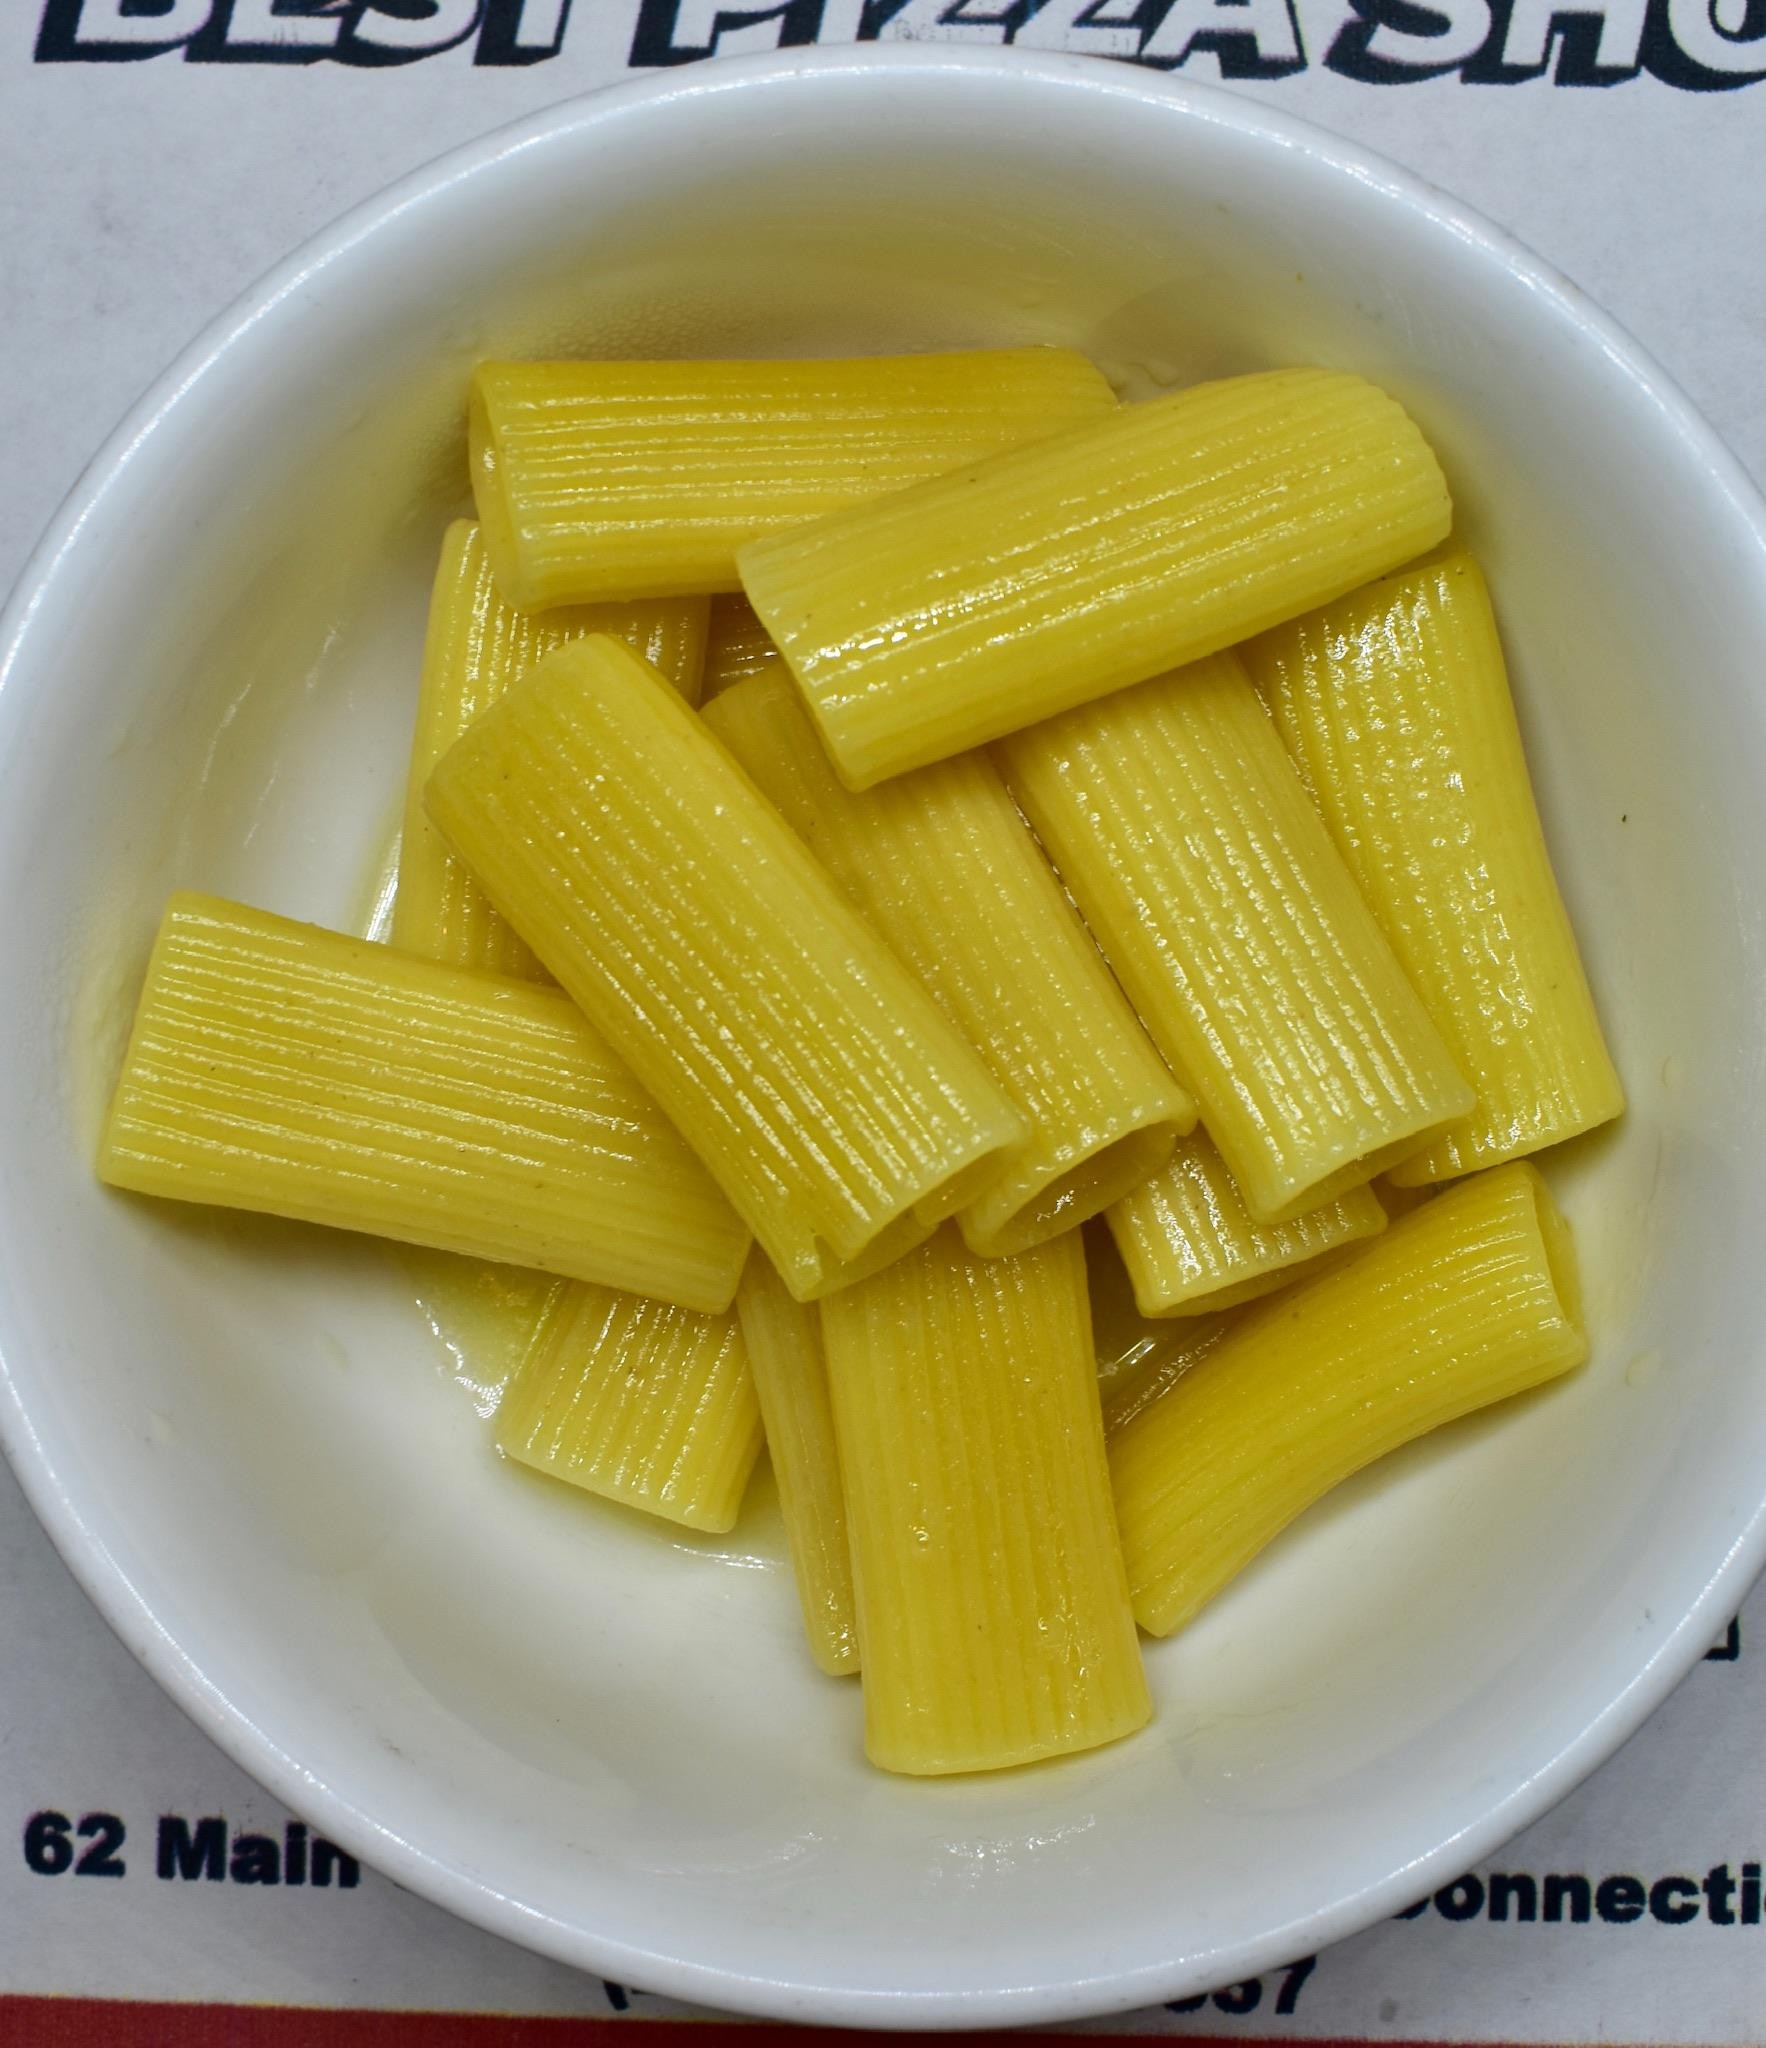 Kids Pasta With Butter